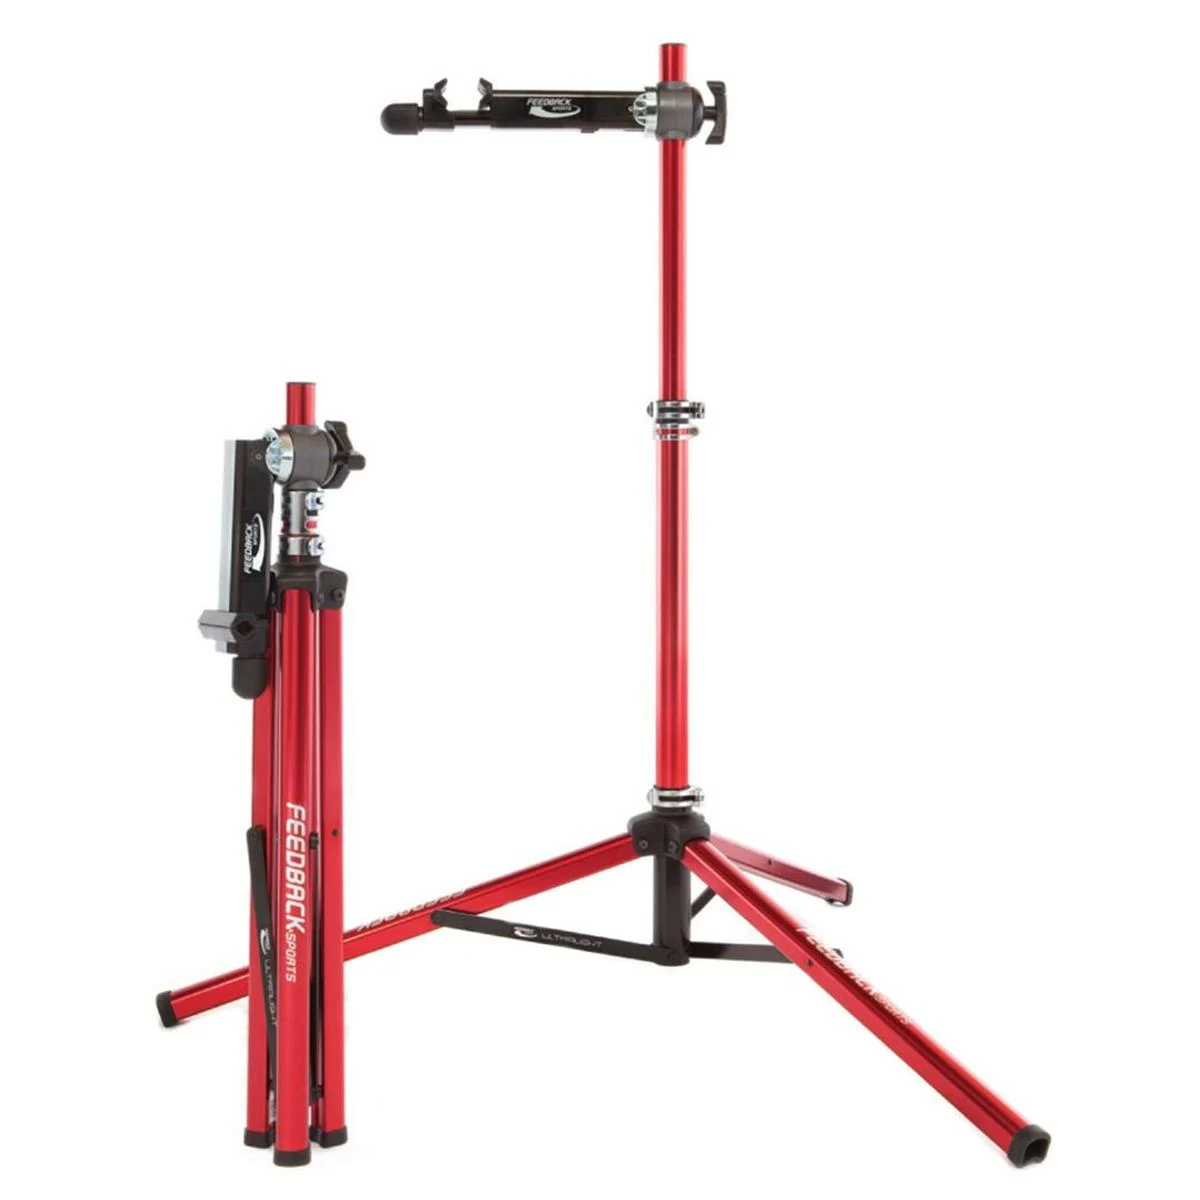 The Ultimate Guide: 10 Expert Tips for Using a Bike Repair Stand